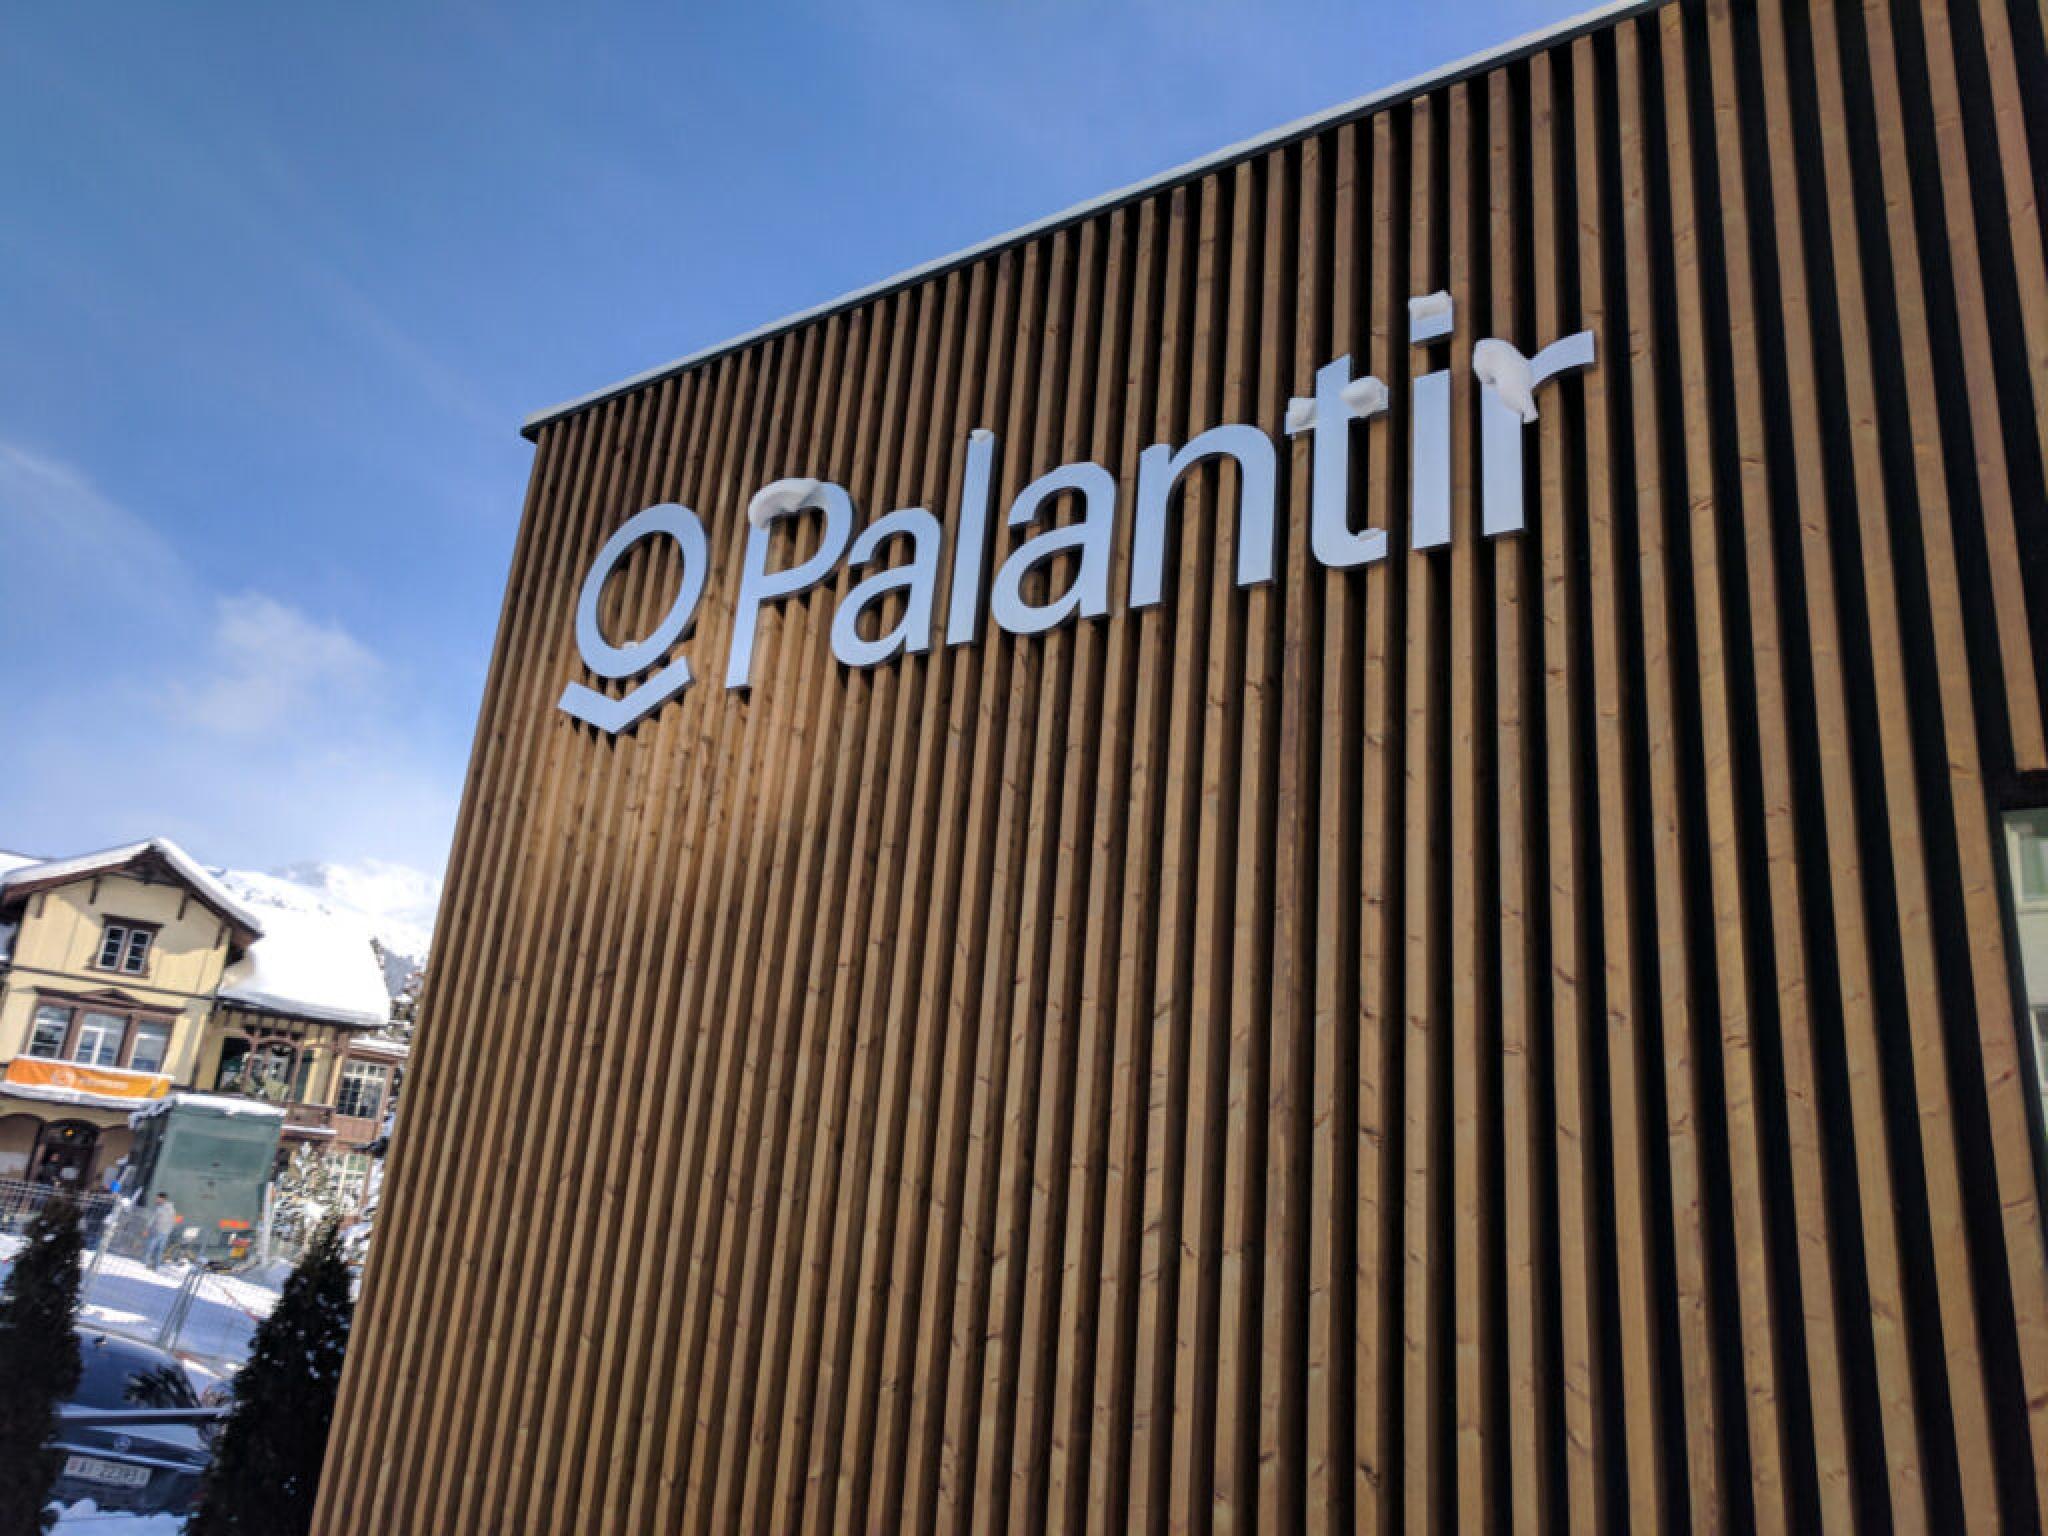  whats-going-on-with-palantir-stock-tuesday 